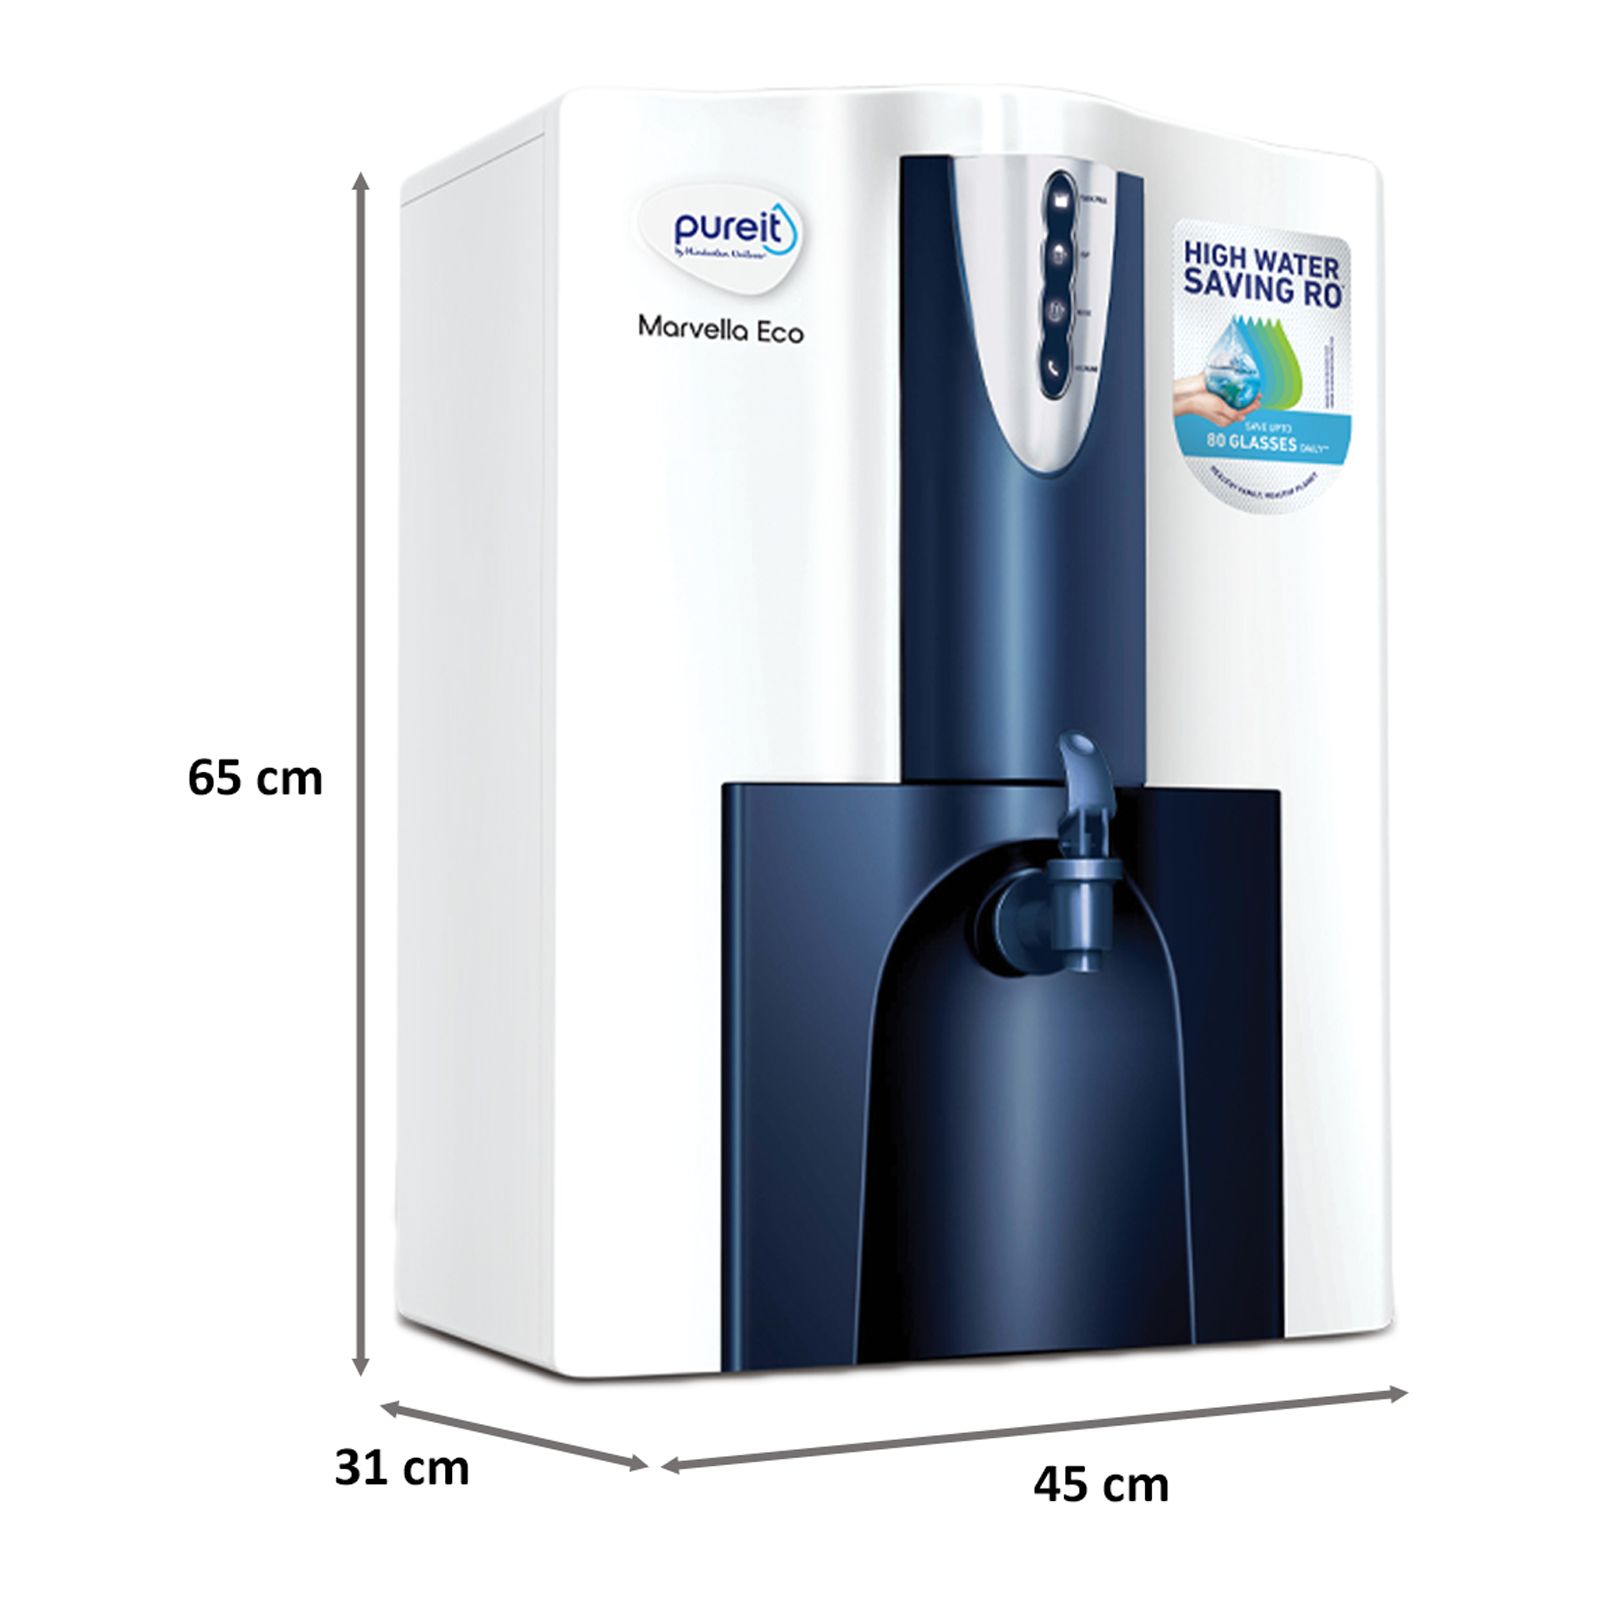 Pureit Marvella Eco RO+UV Electrical Water Purifier (7 Stage Purification, WPNT500, White and Blue)_2